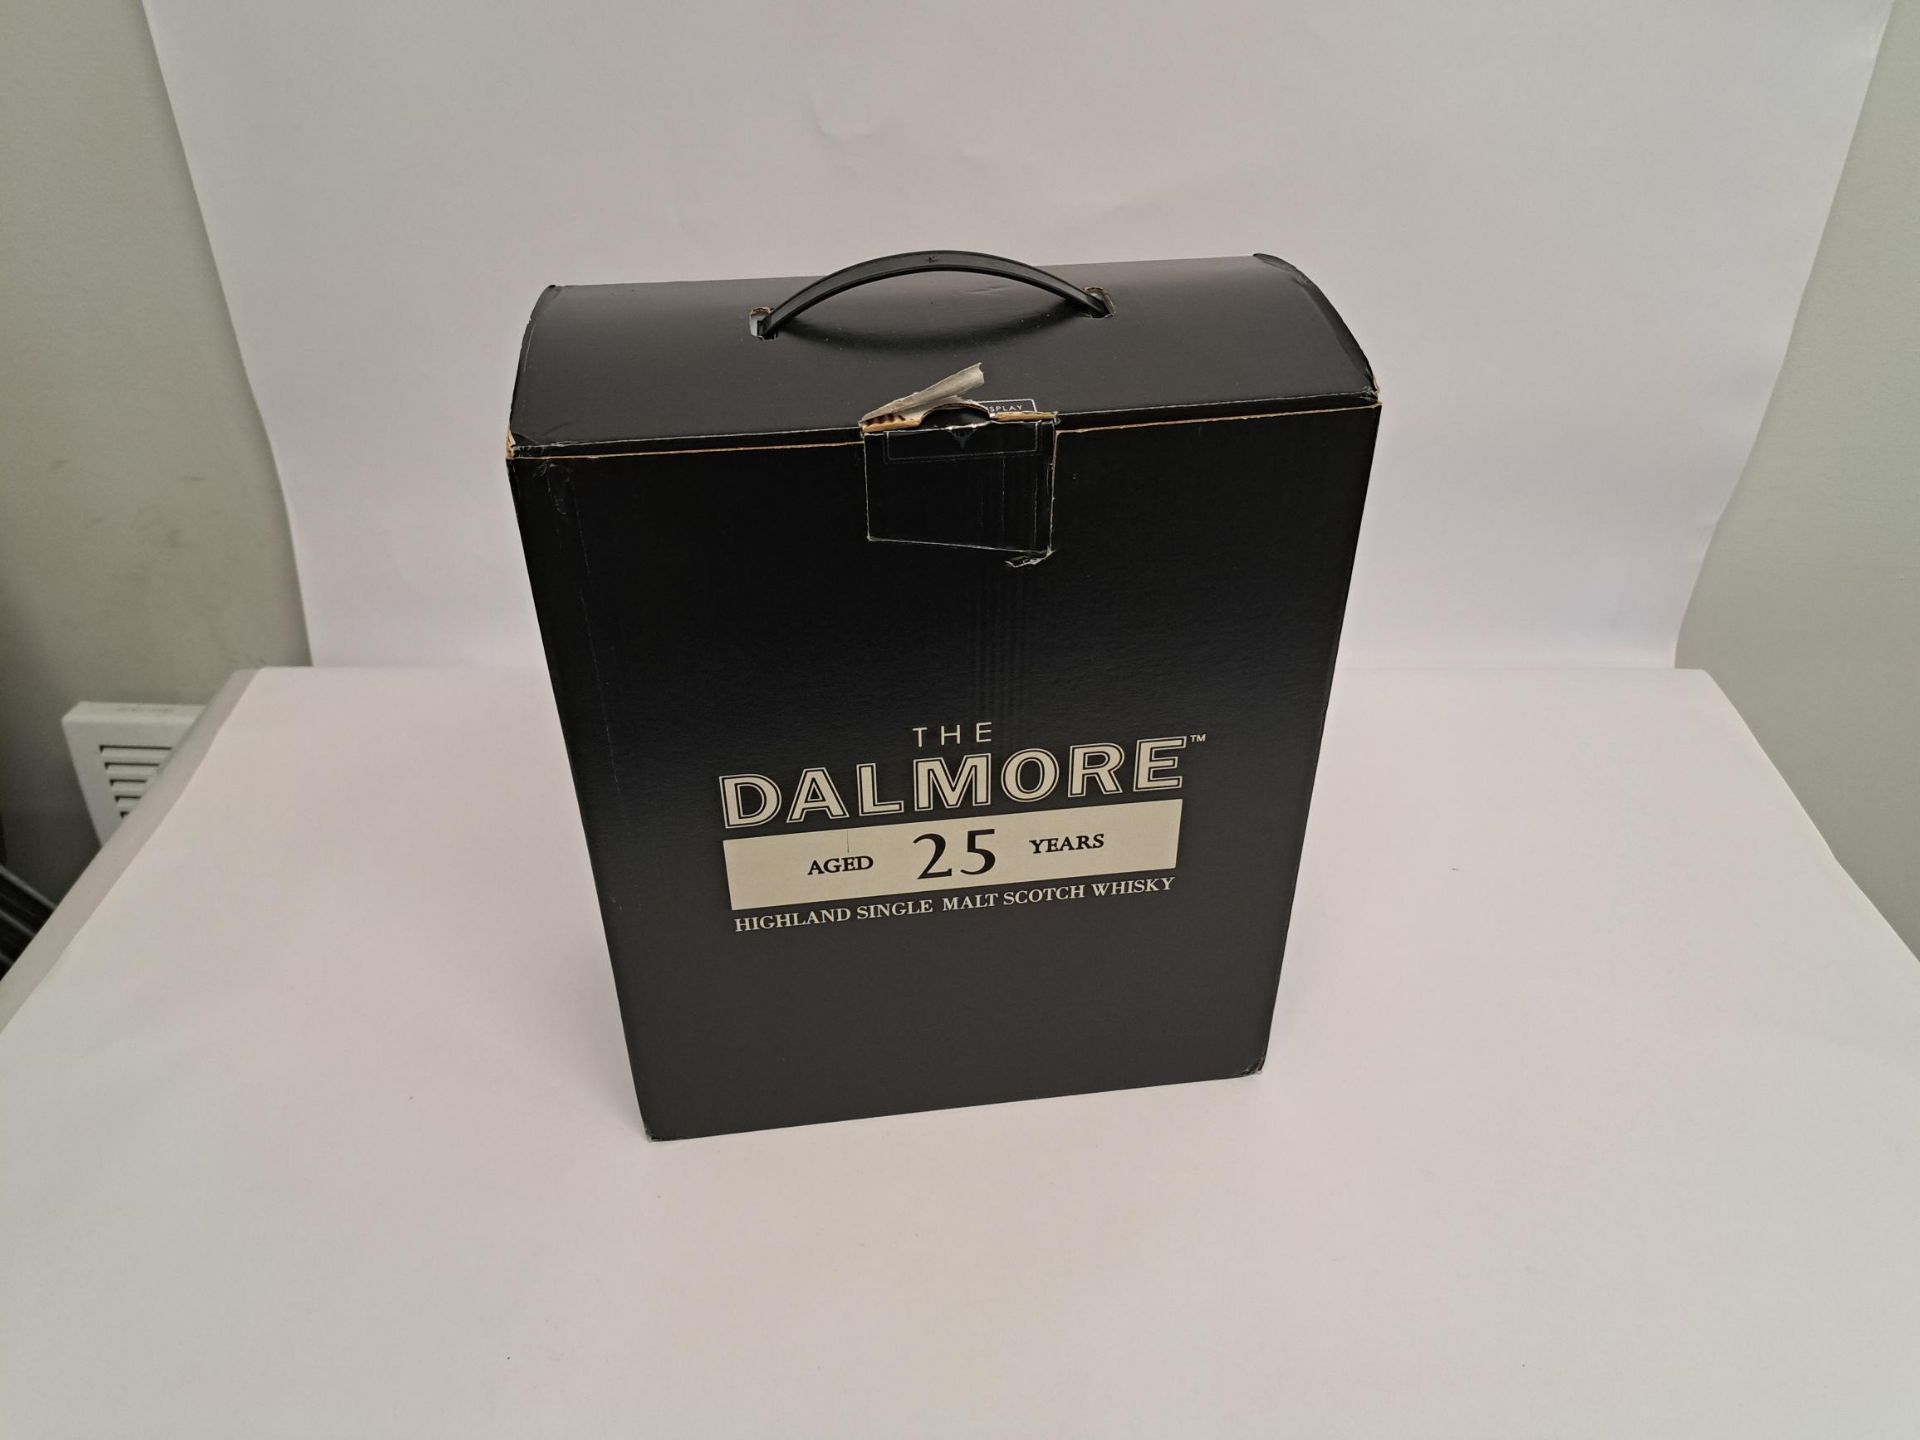 The Dalmore Aged 25 Year Highland Single Malt Scotch Whisky 700ml. Box Unsealed By Staff Member to c - Image 4 of 8